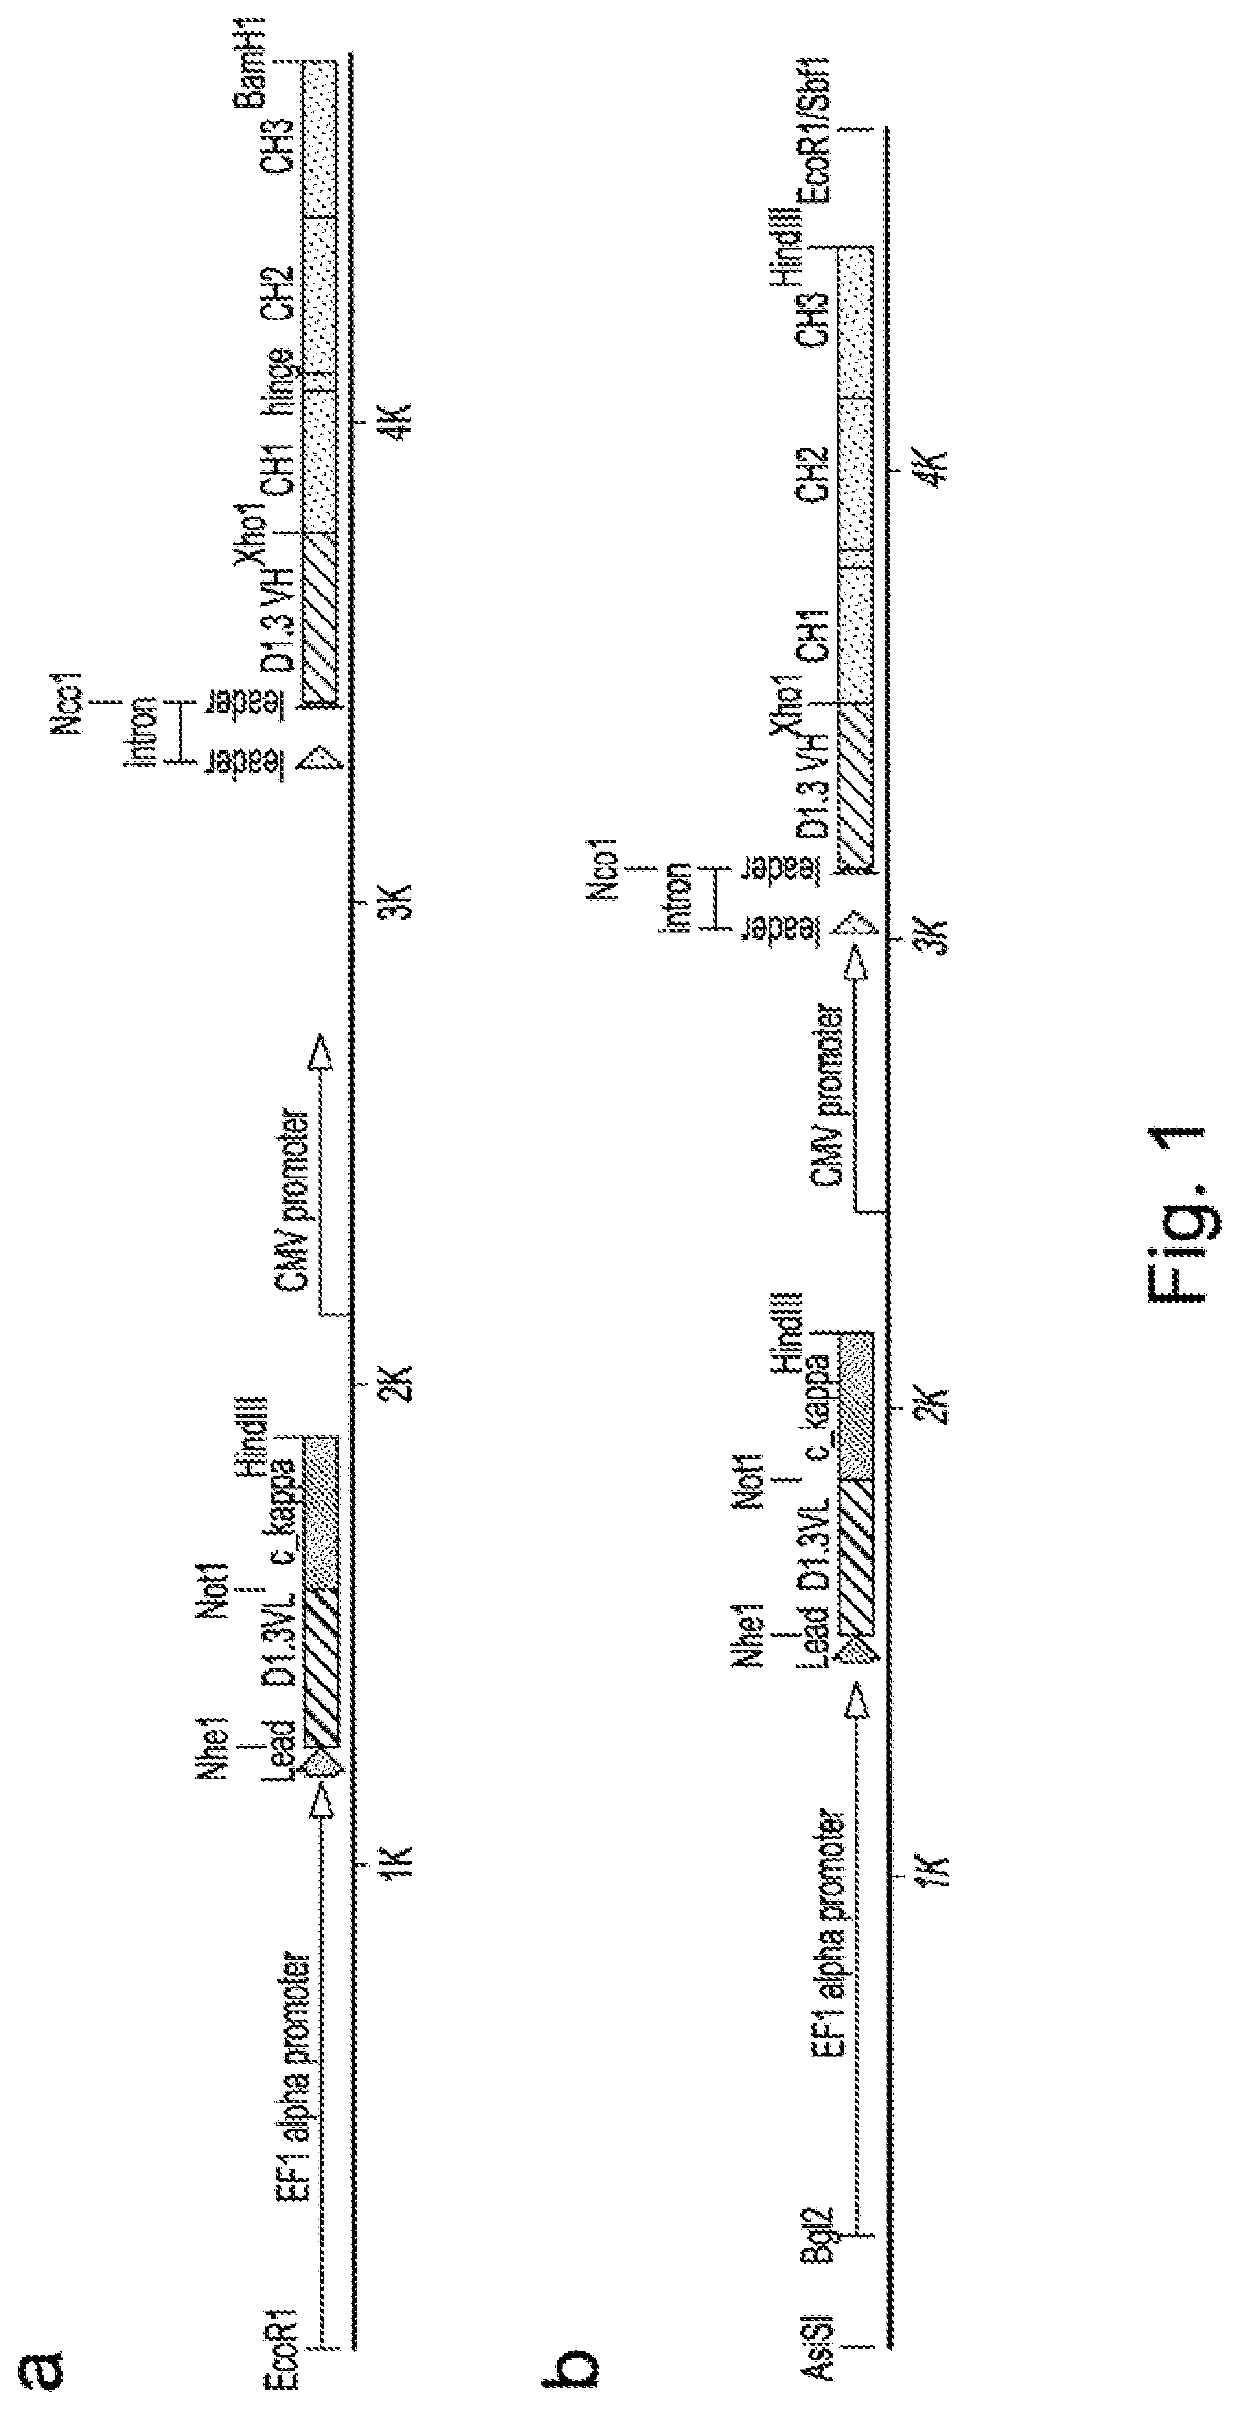 Preparation of libraries of protein variants expressed in eukaryotic cells and use for selecting binding molecules